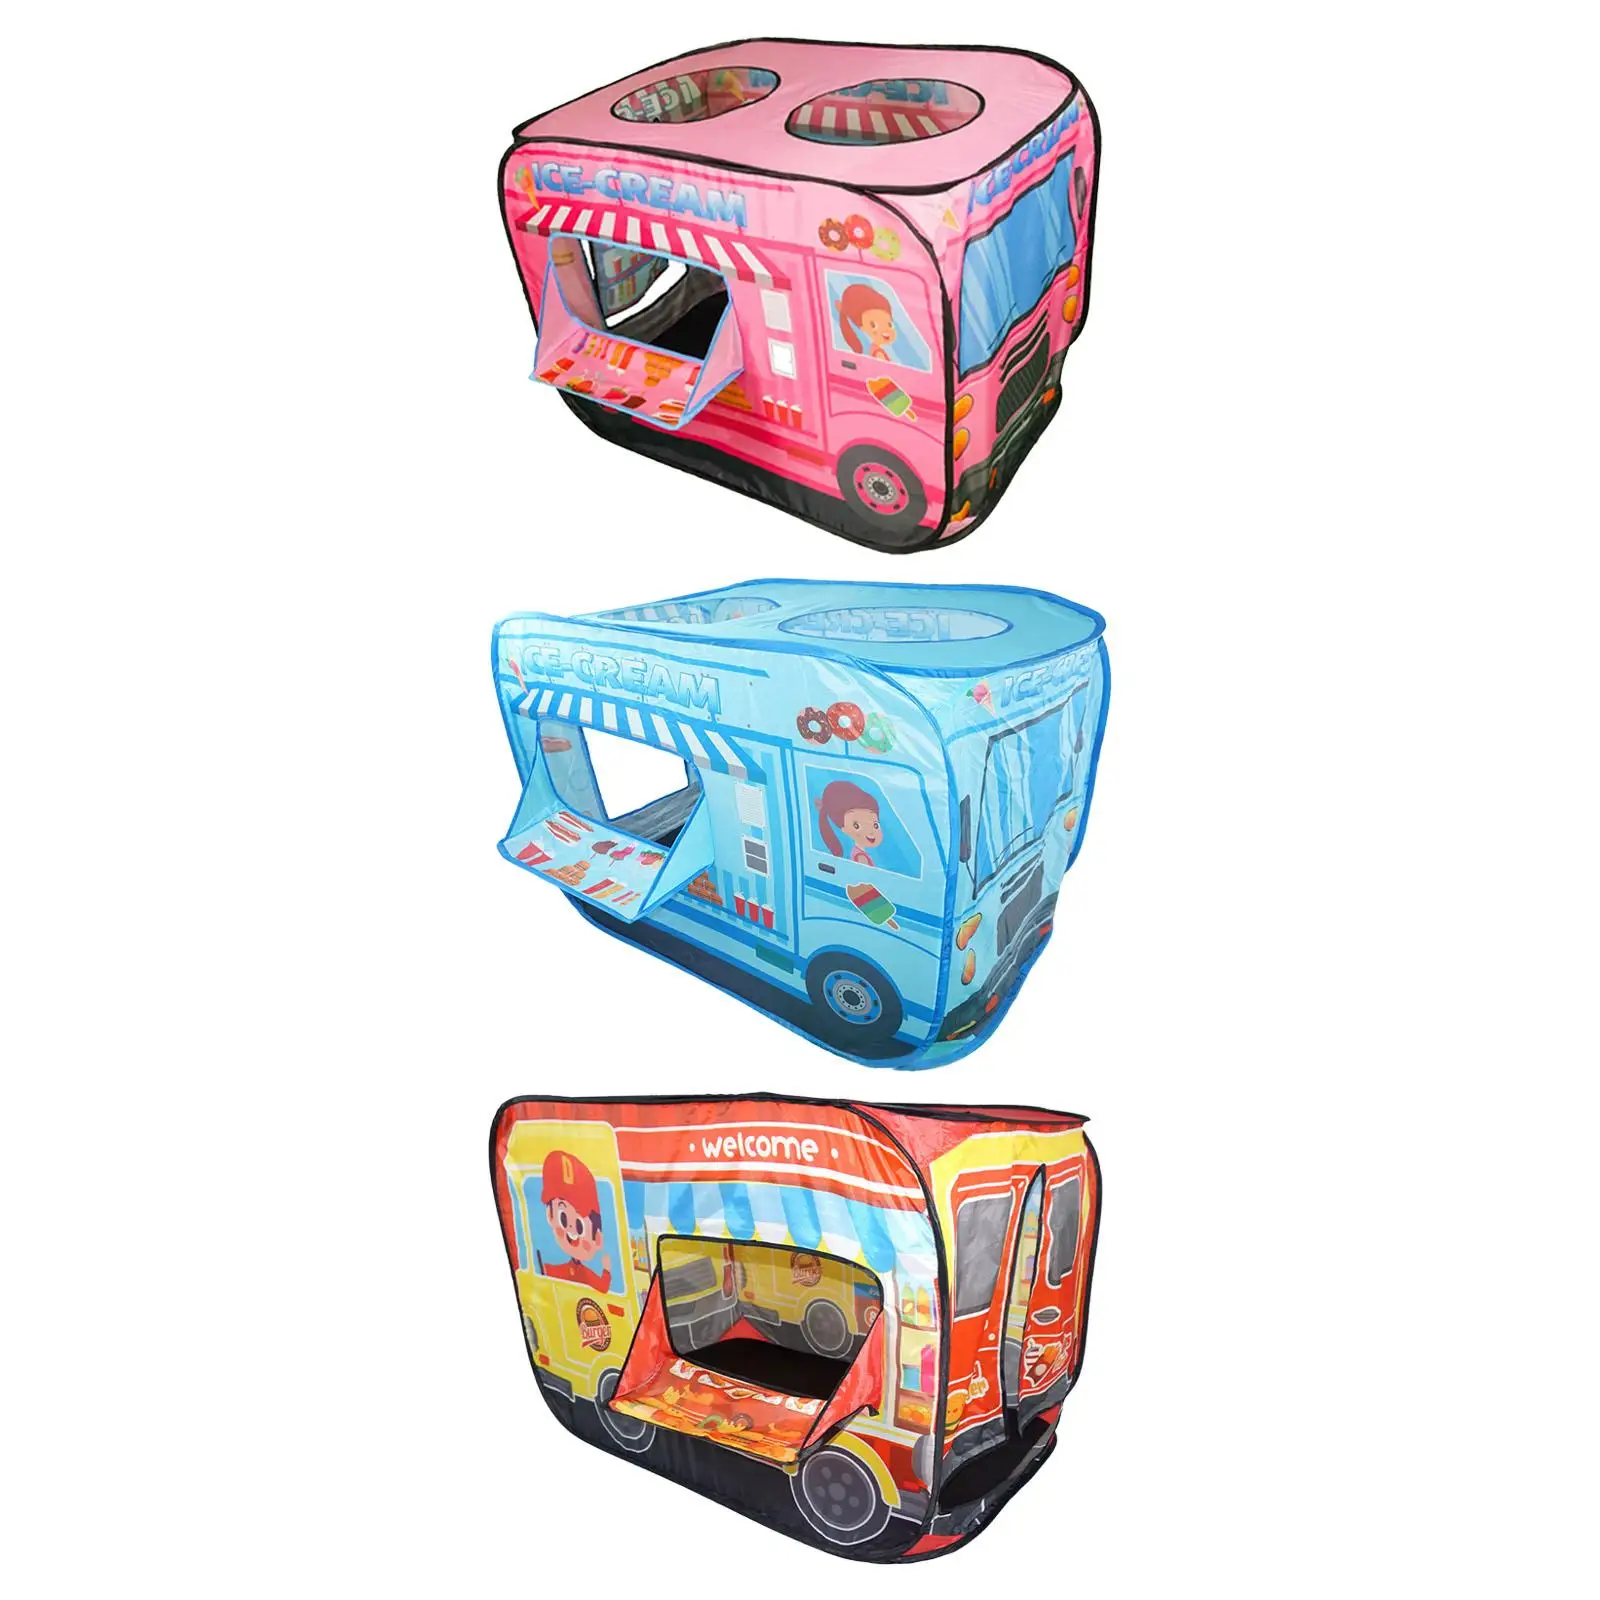 

Kid Play House Tent Easy Installation Cartoon Bus Portable Multi Use Tent Game Play House for Park Outdoor Indoor Camping Home